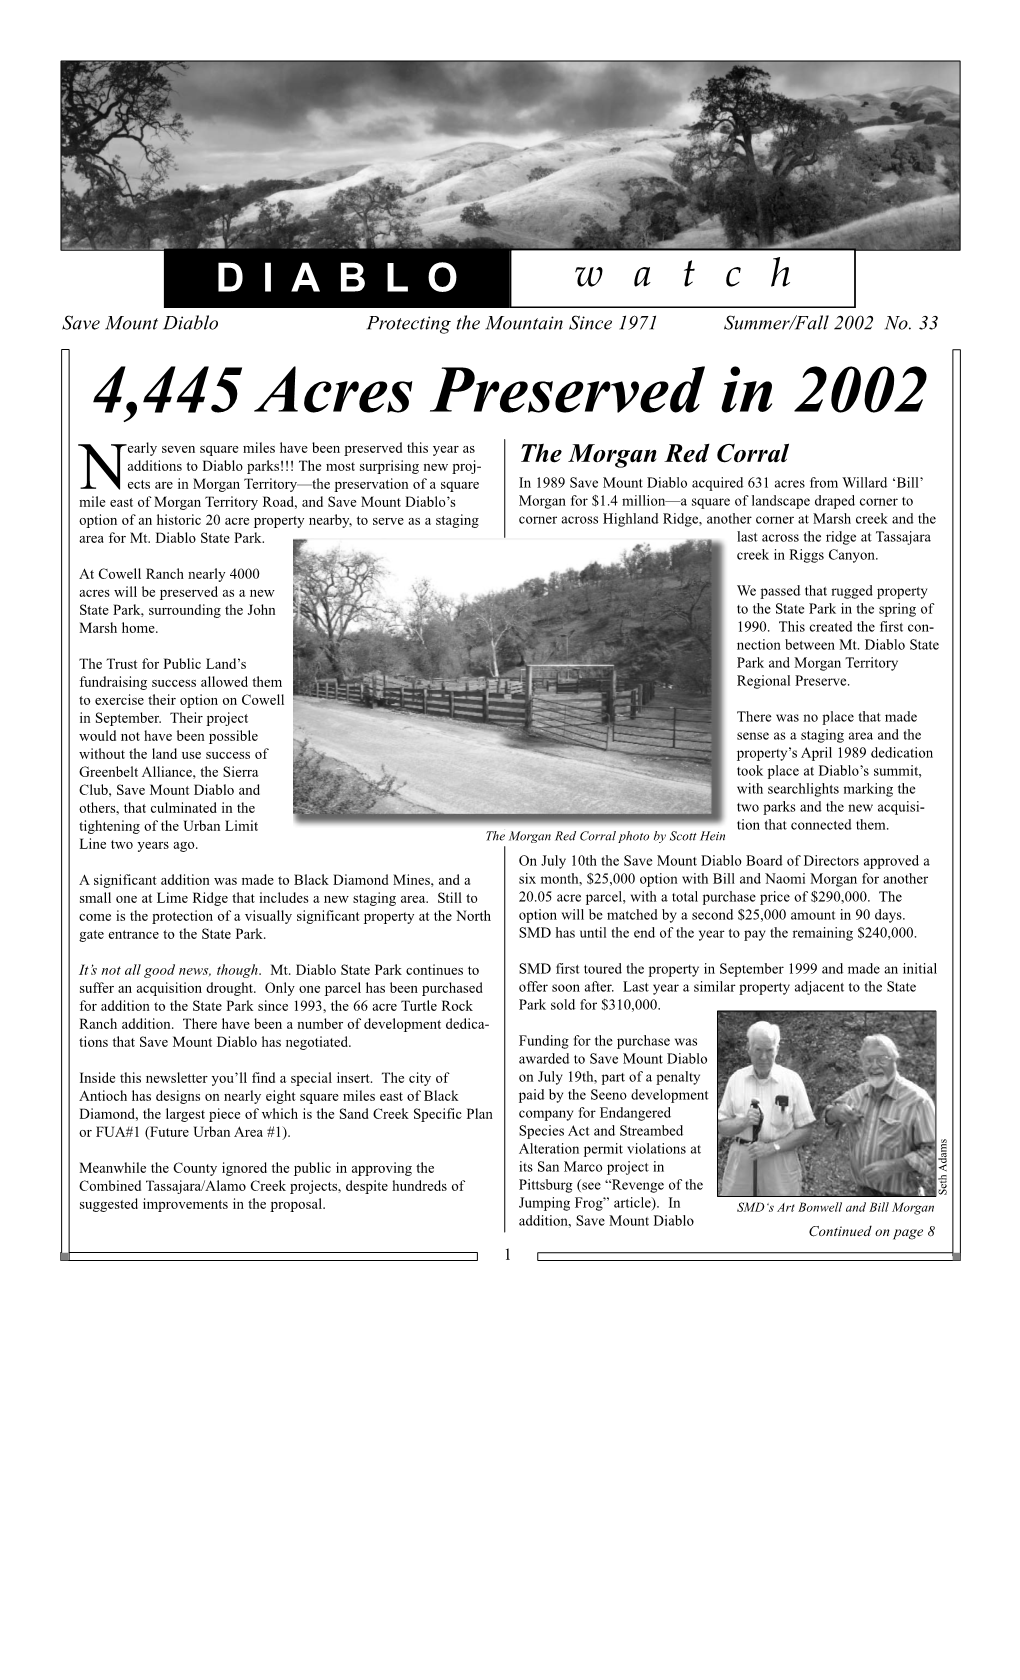 4,445 Acres Preserved in 2002